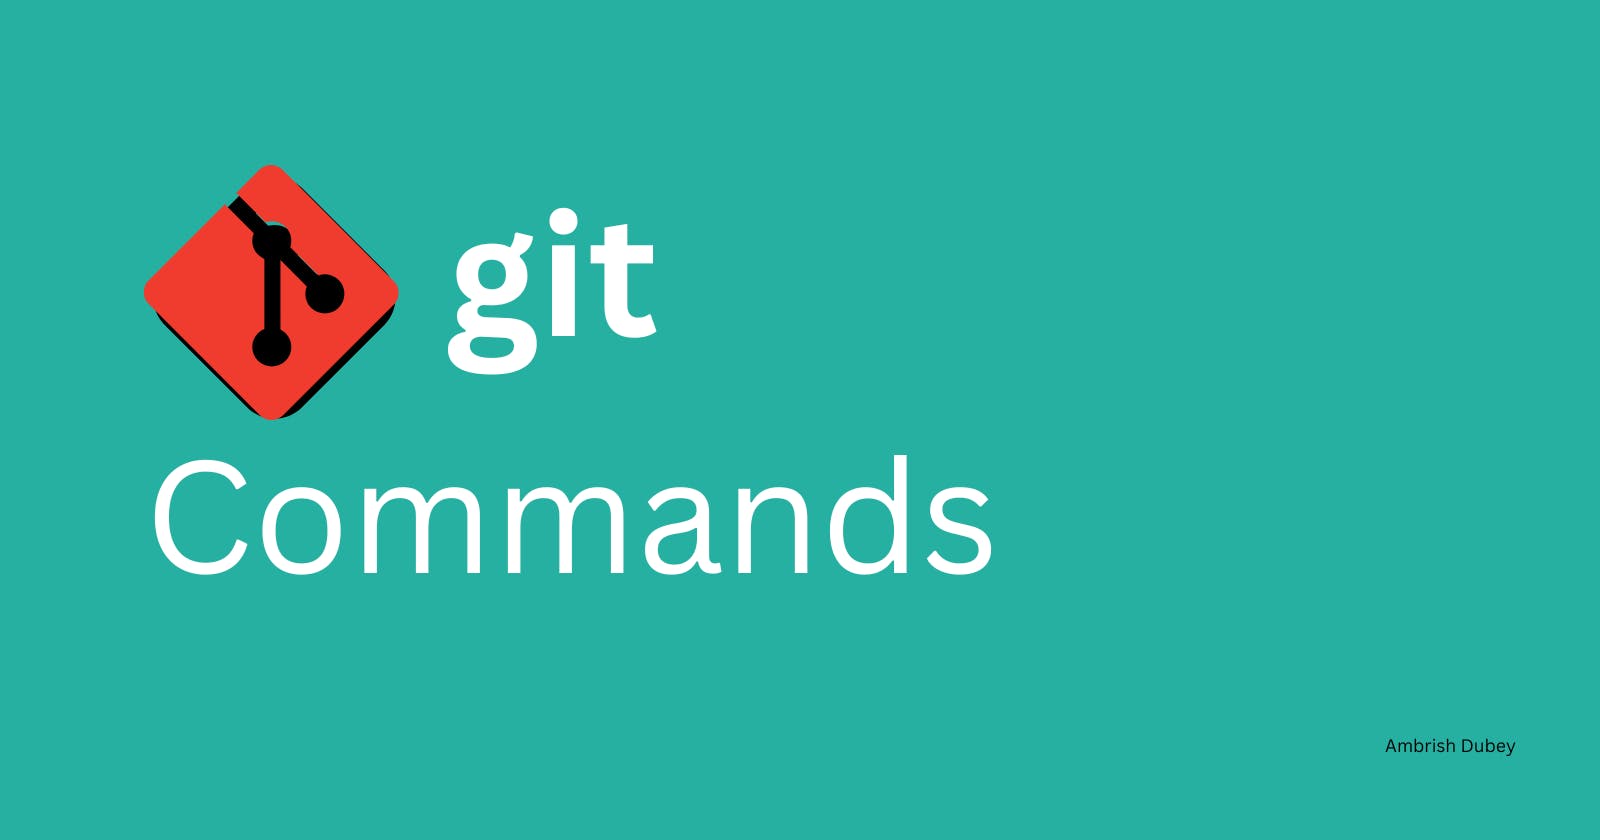 Git Cheat Sheet: Your Handy Quick Reference